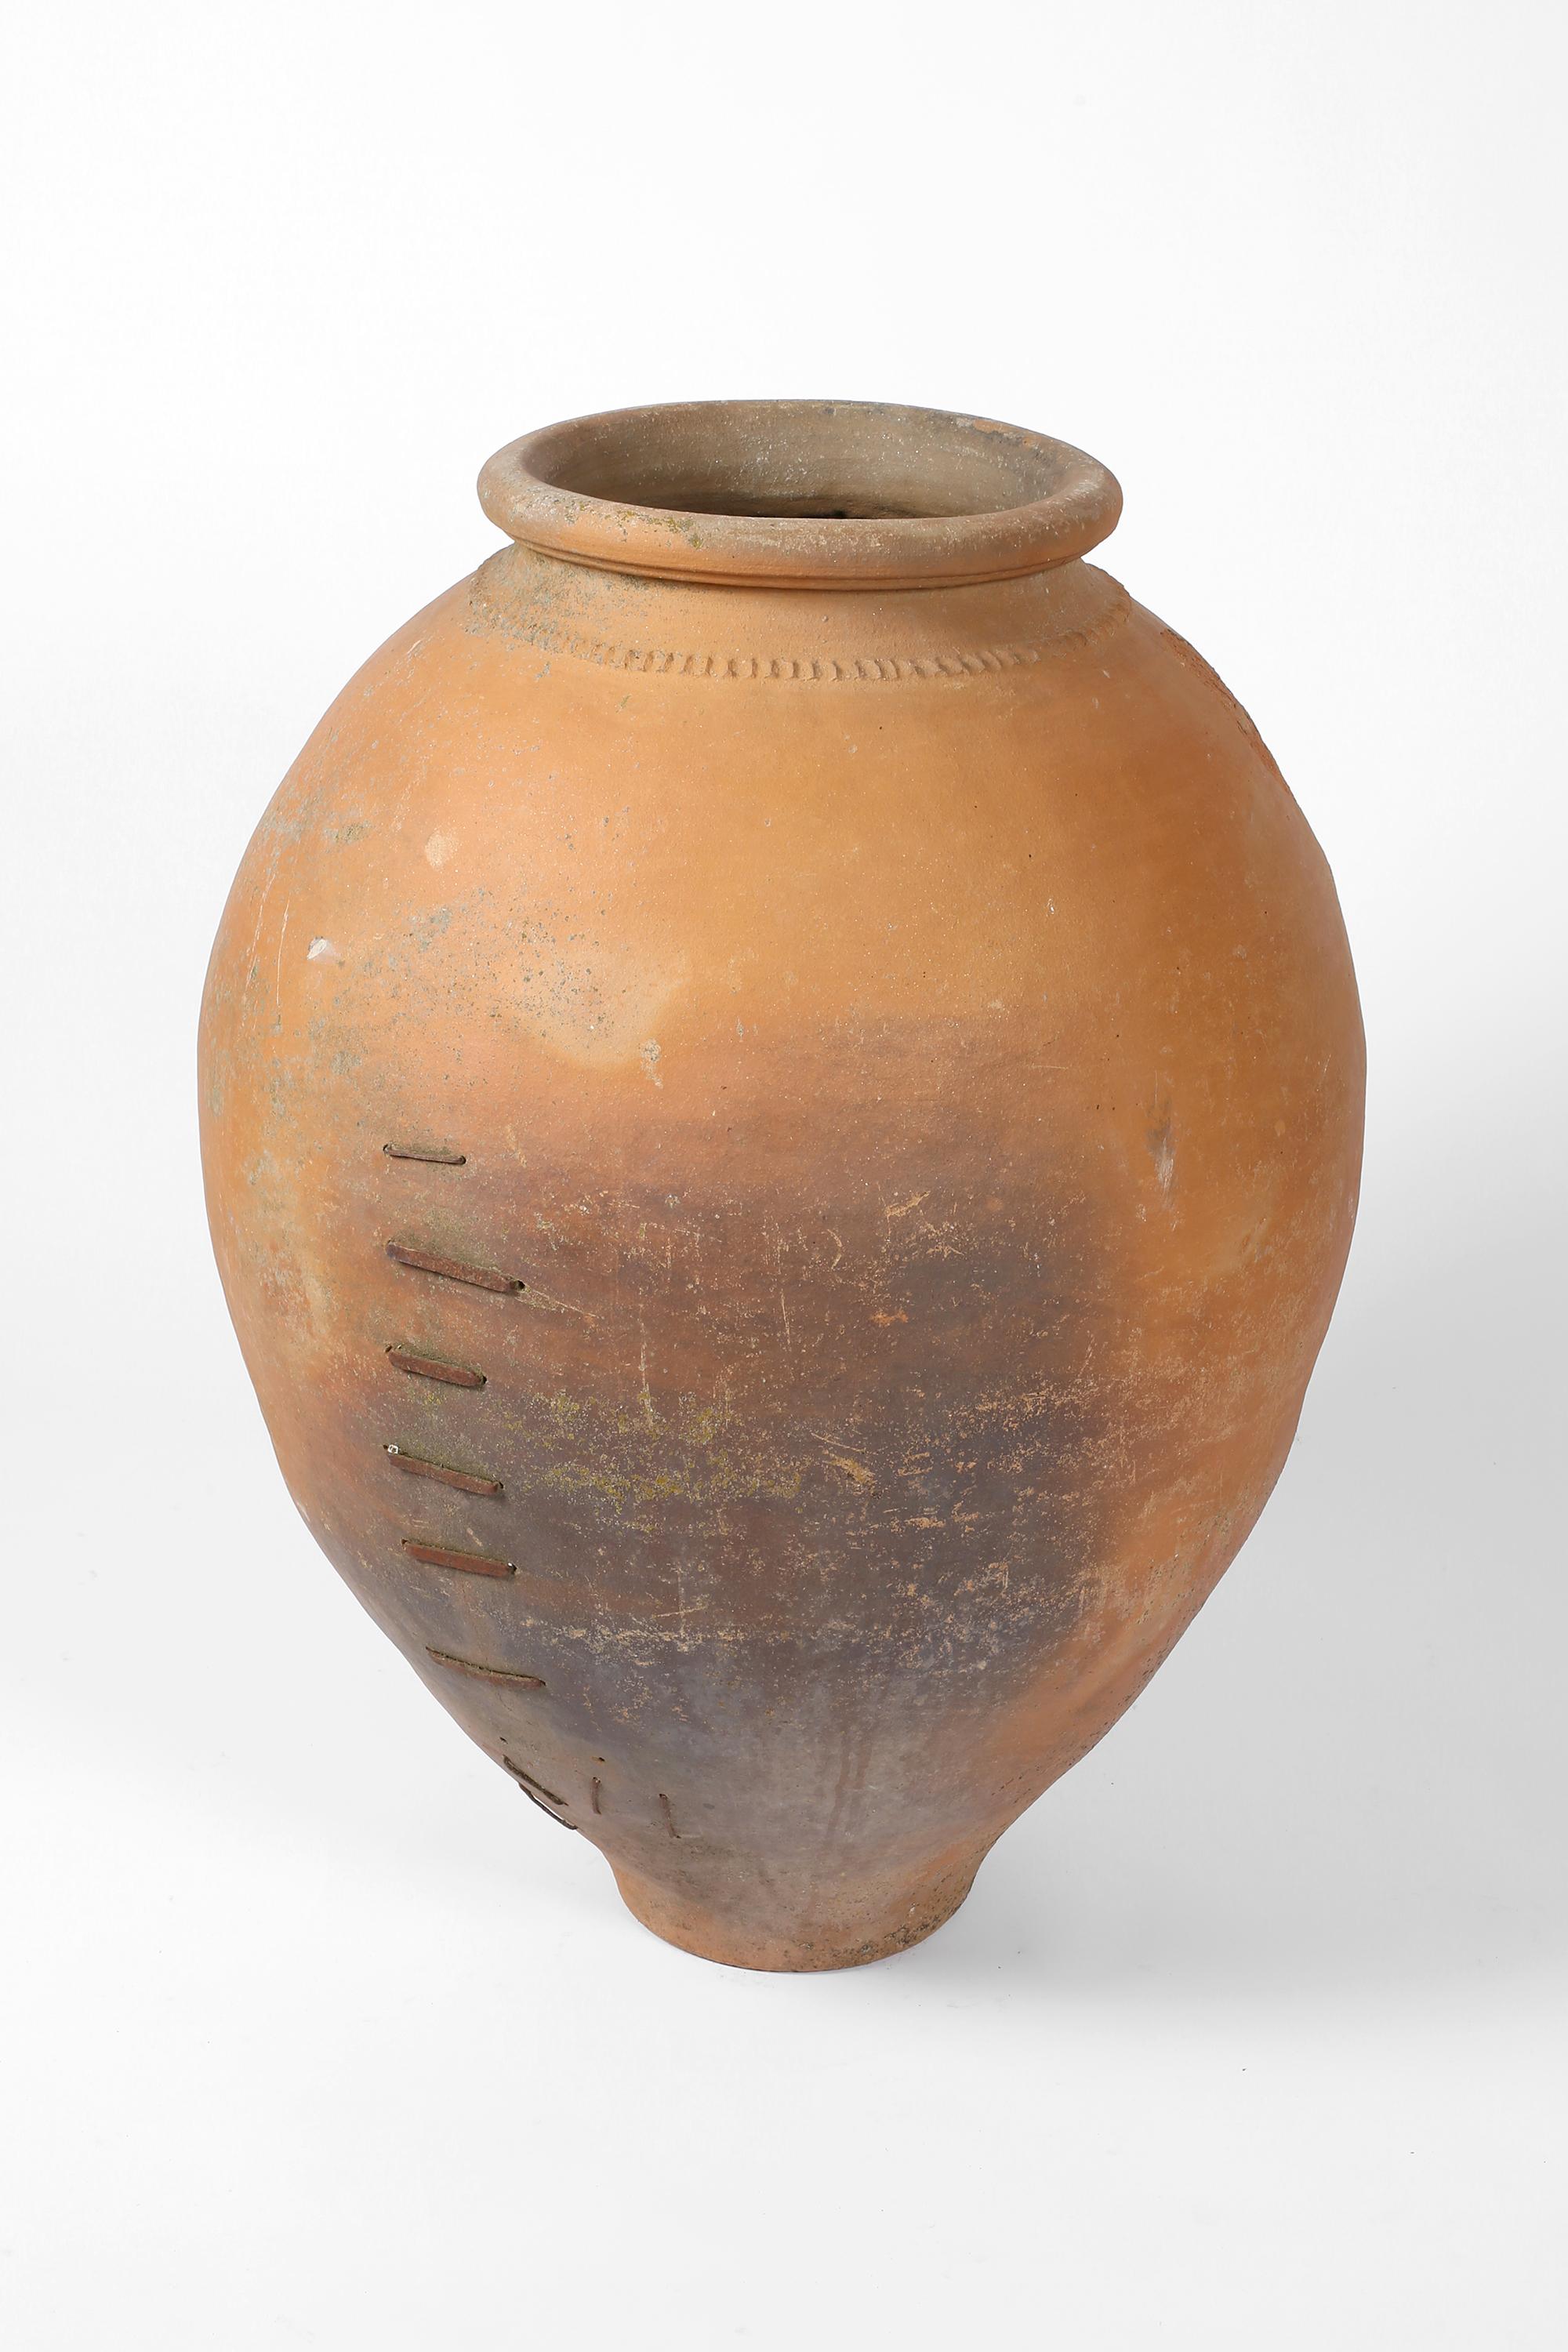 A very large and heavily patinated hand-thrown terracotta wine jar, with characterful iron staple repair to a hairline crack. From the province of Seville in Andalusia. Spanish, circa 1780.

H101 cm